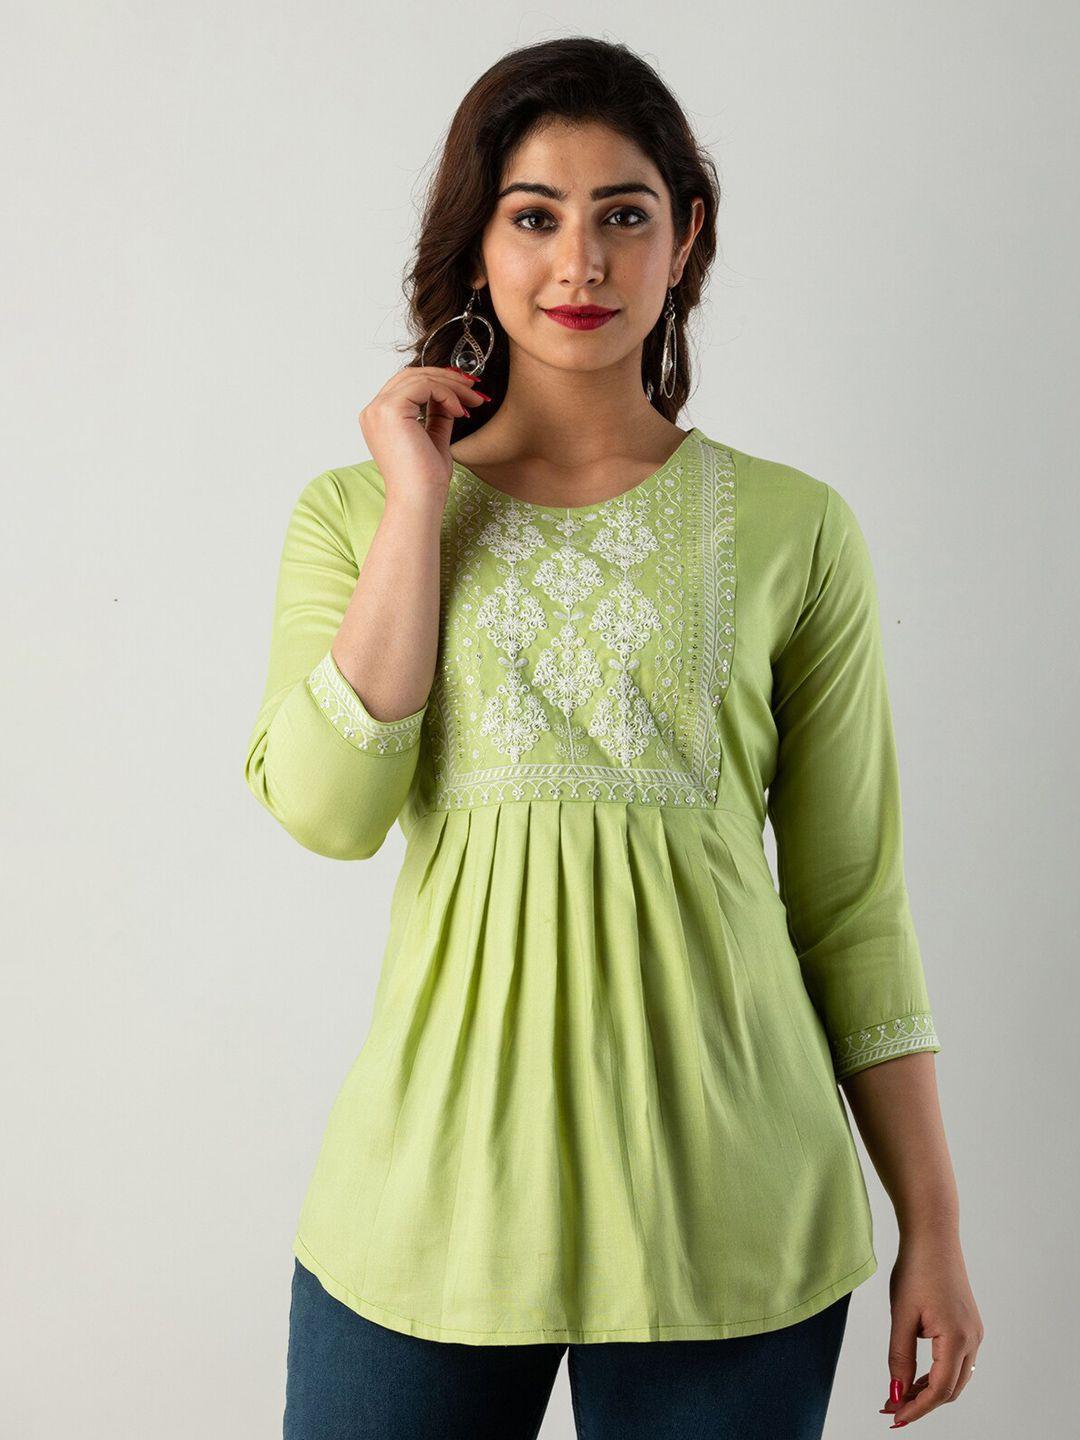 kalini round neck pleated ethnic motifs embroidered a-line top